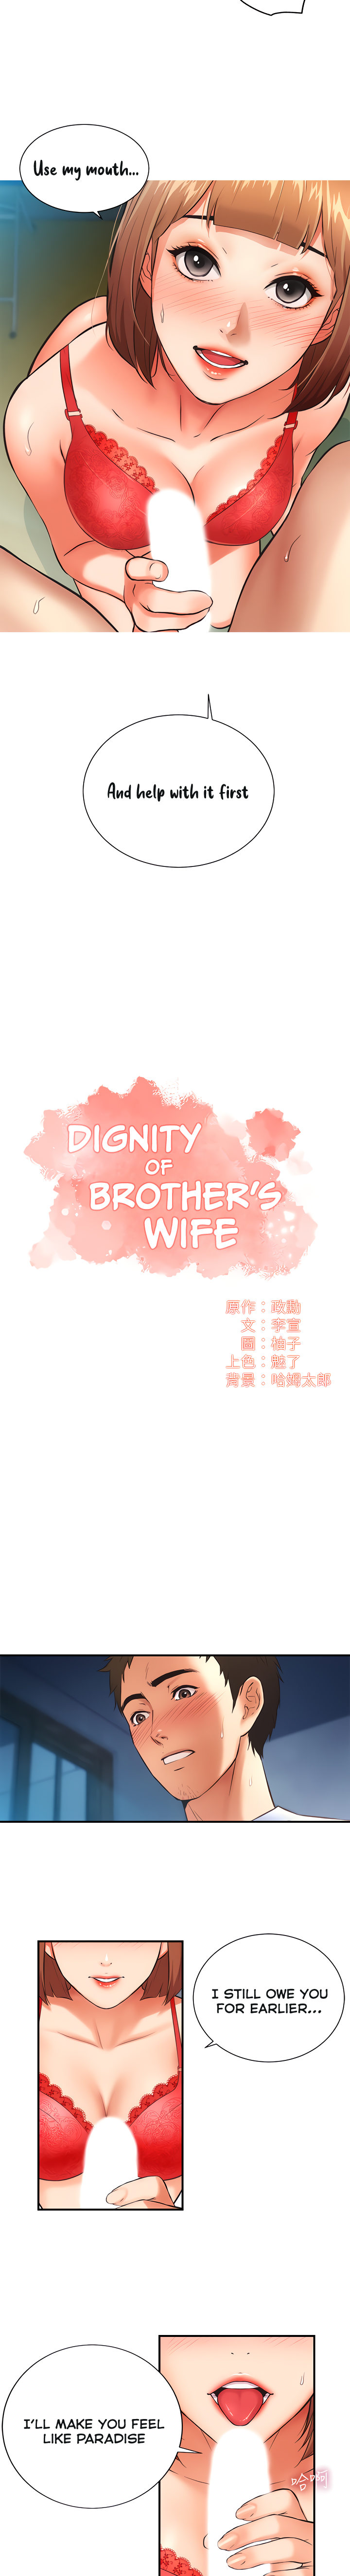 Brother’s Wife Dignity - Chapter 7 Page 2